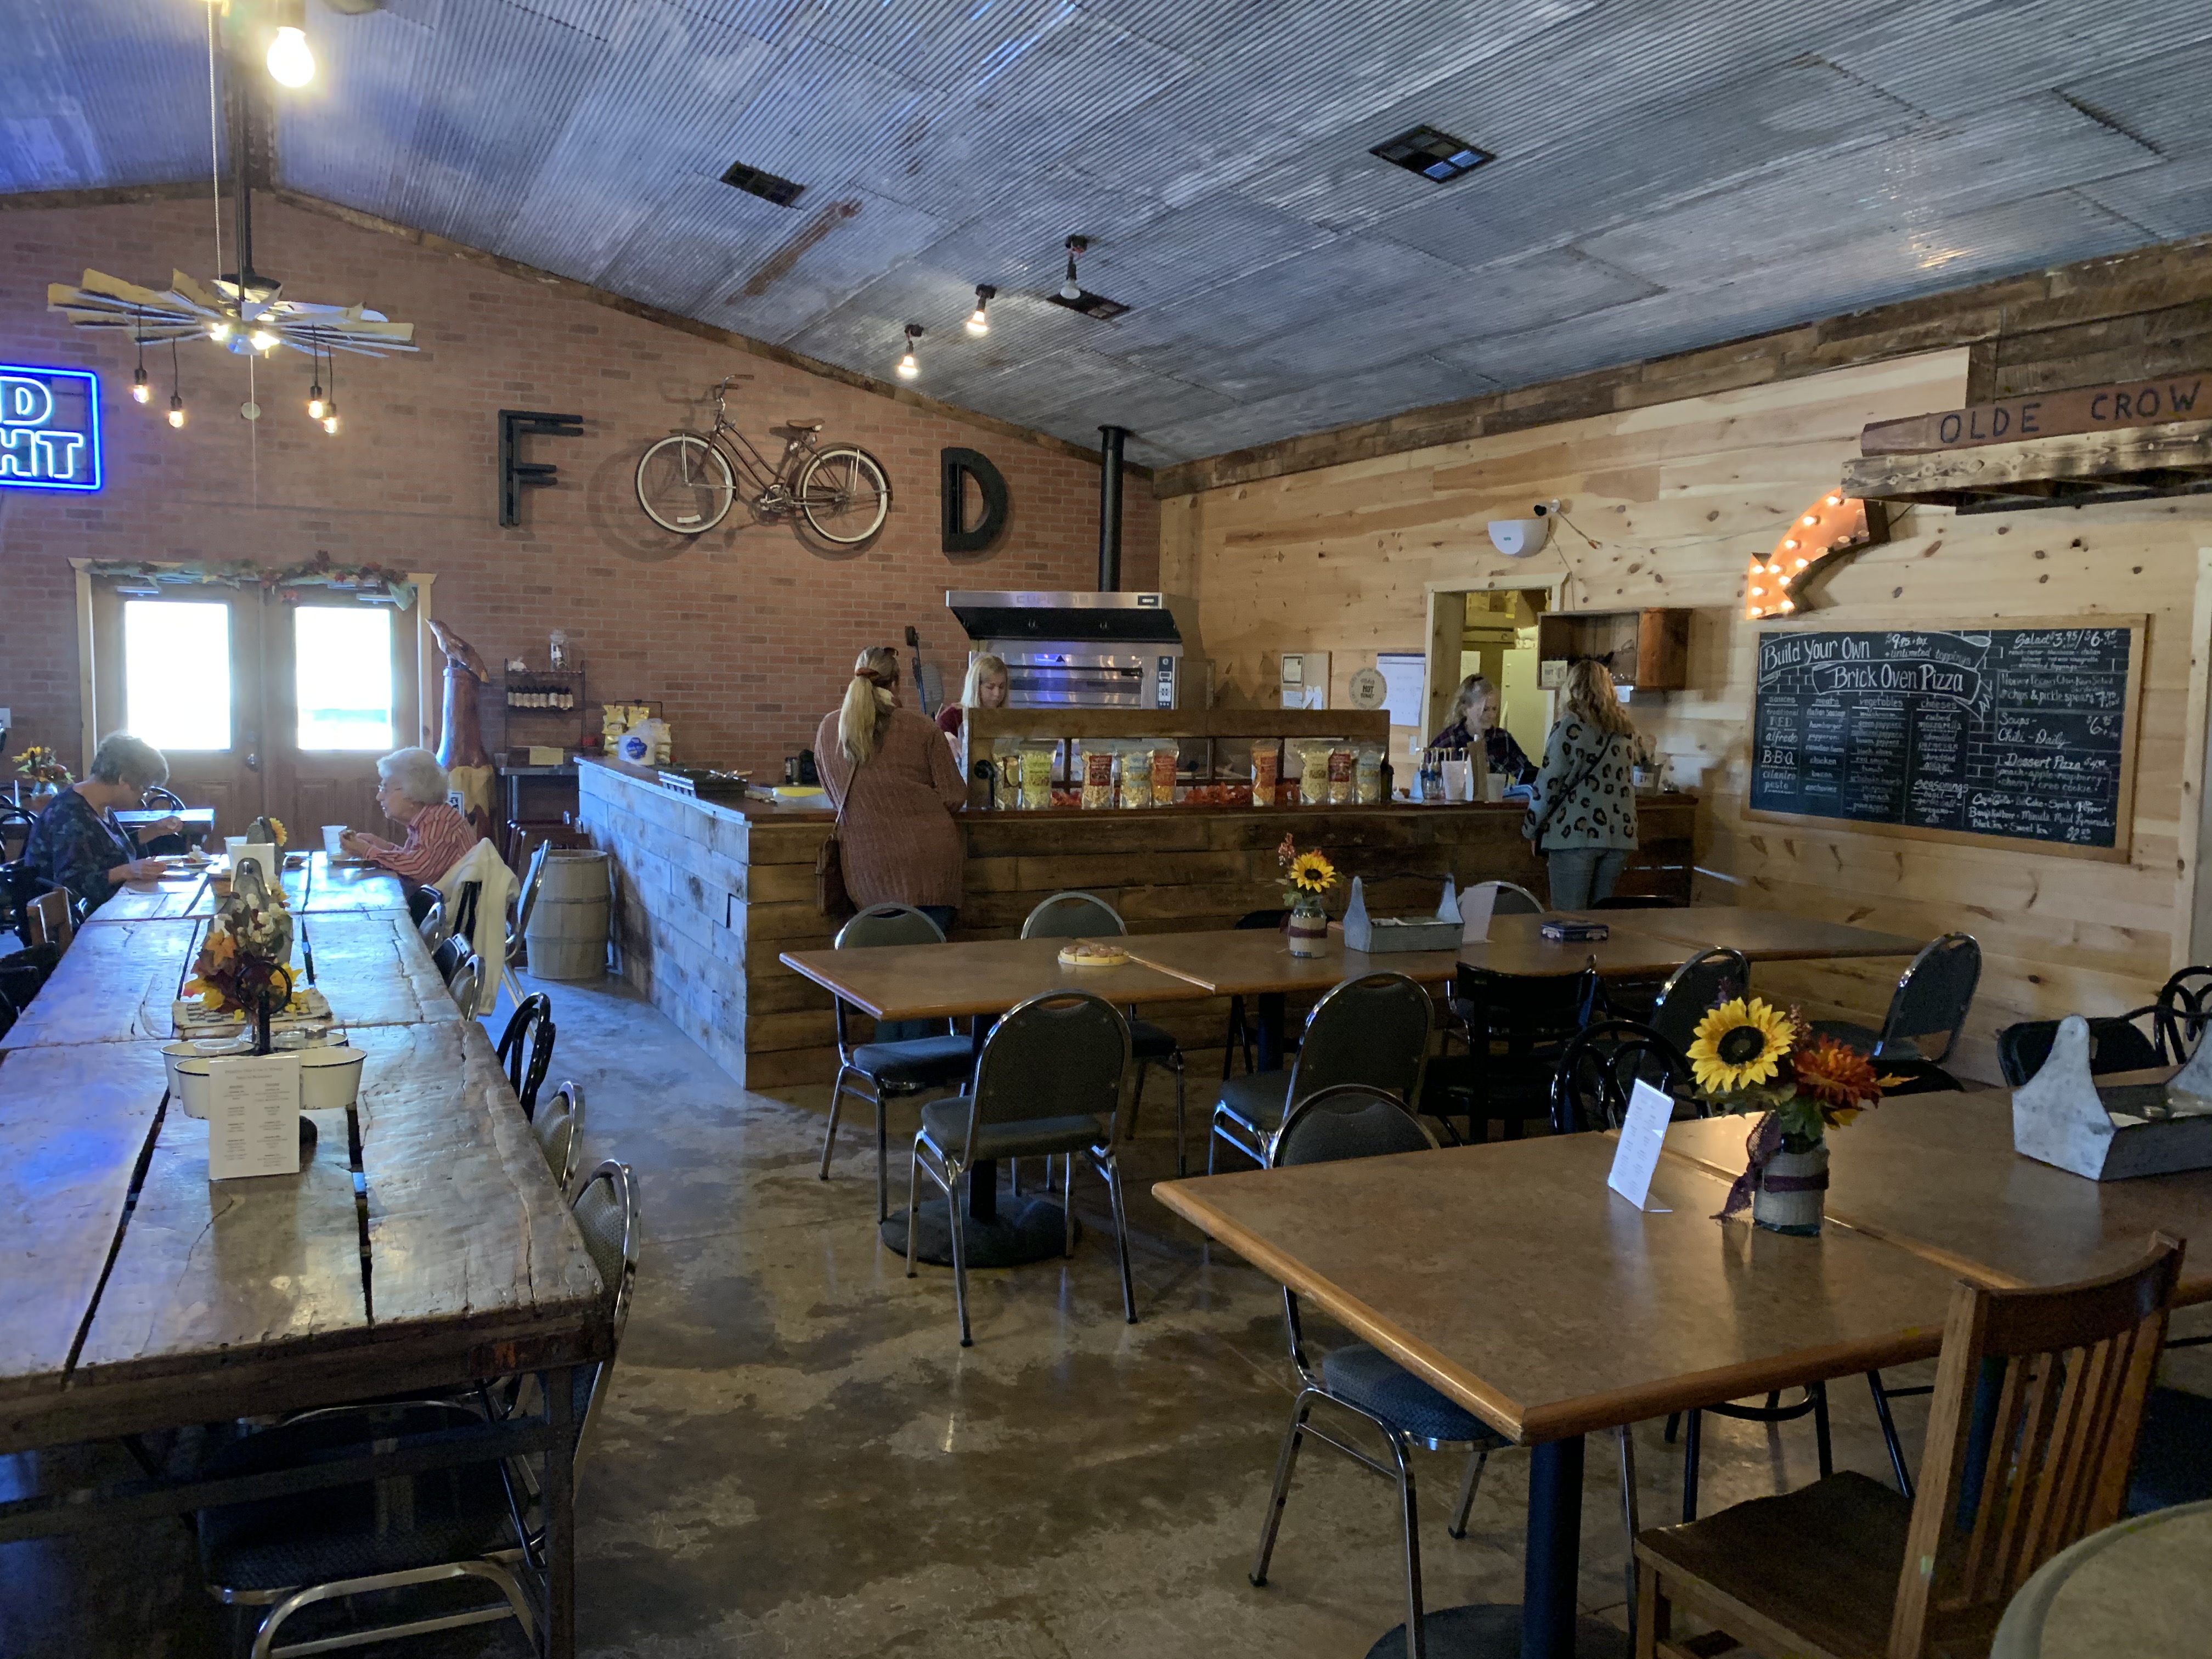 Primitive Olde Crow and Winery- Indoor food and pizza area with several tables with sunflowers.